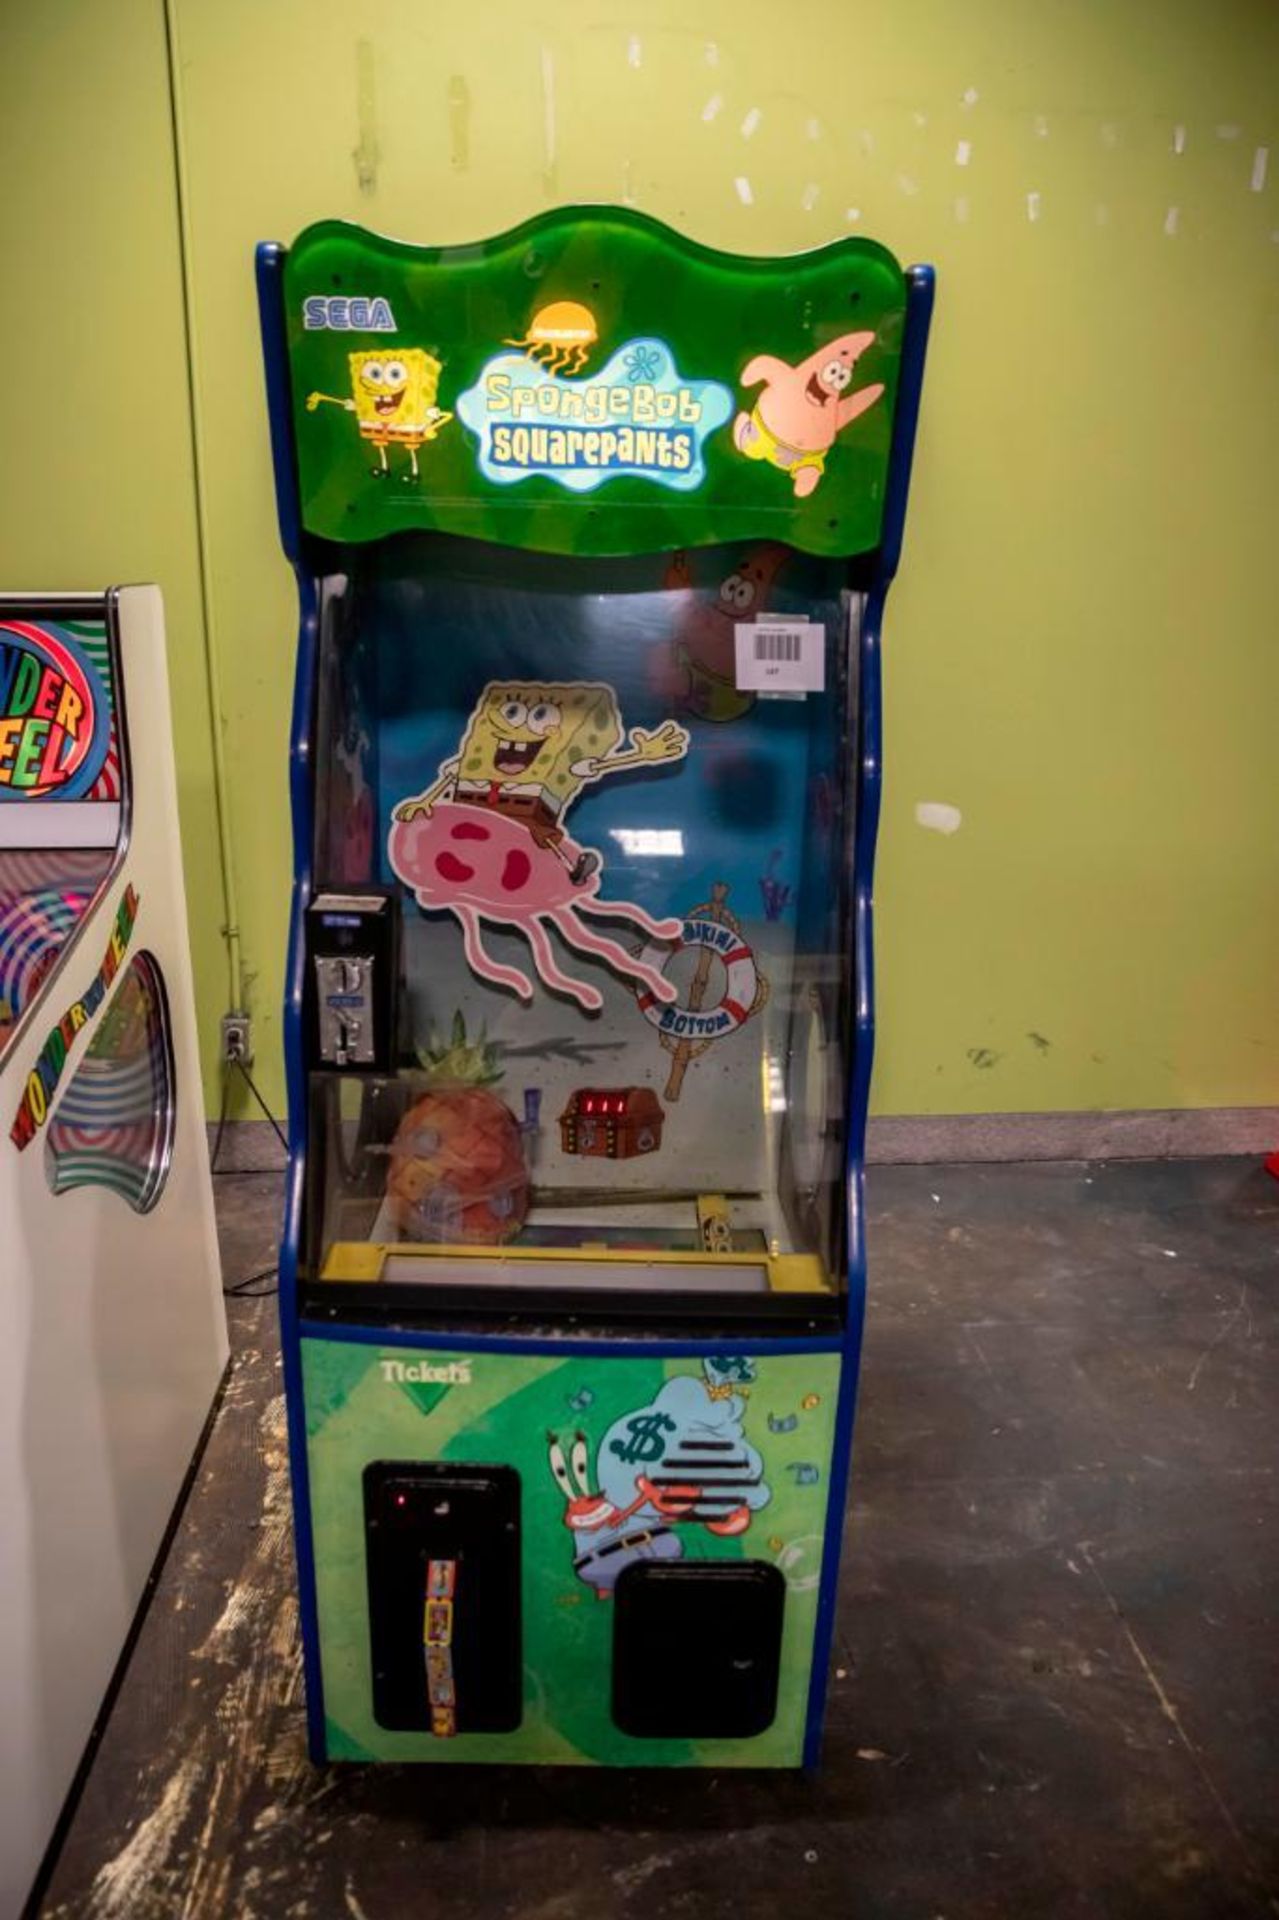 SpongeBob by Sega - Functional. Used, shows commercial use. See pictures.